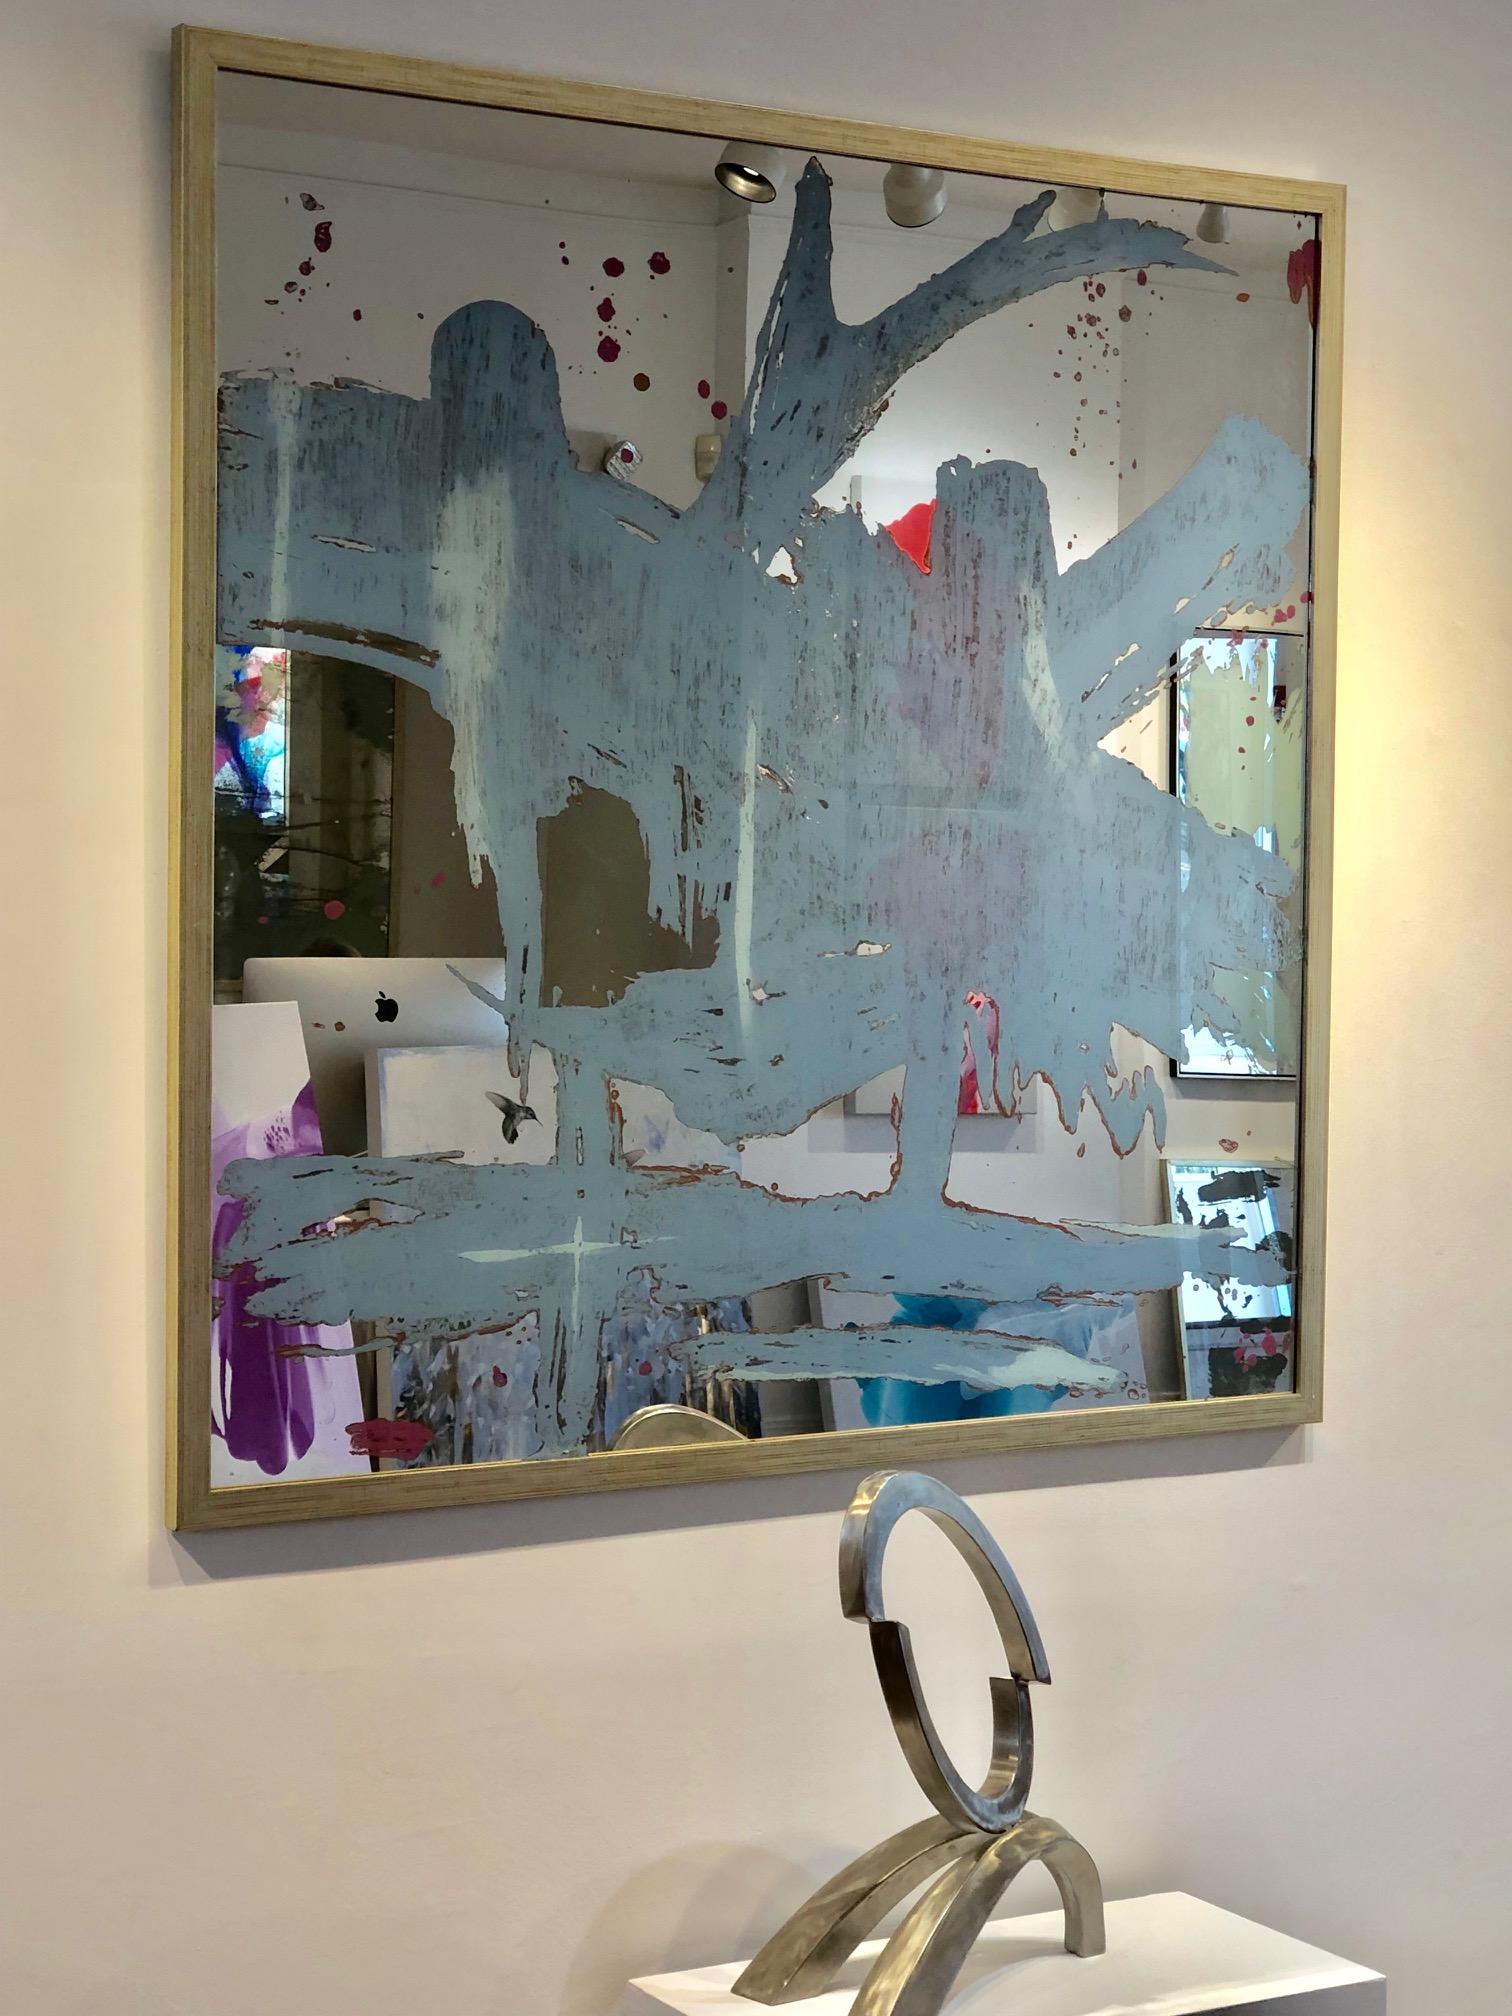 Stacy Milburn Abstract Painting - 'Southern Skies', Large Framed Contemporary Mixed-Media Painting on Mirror